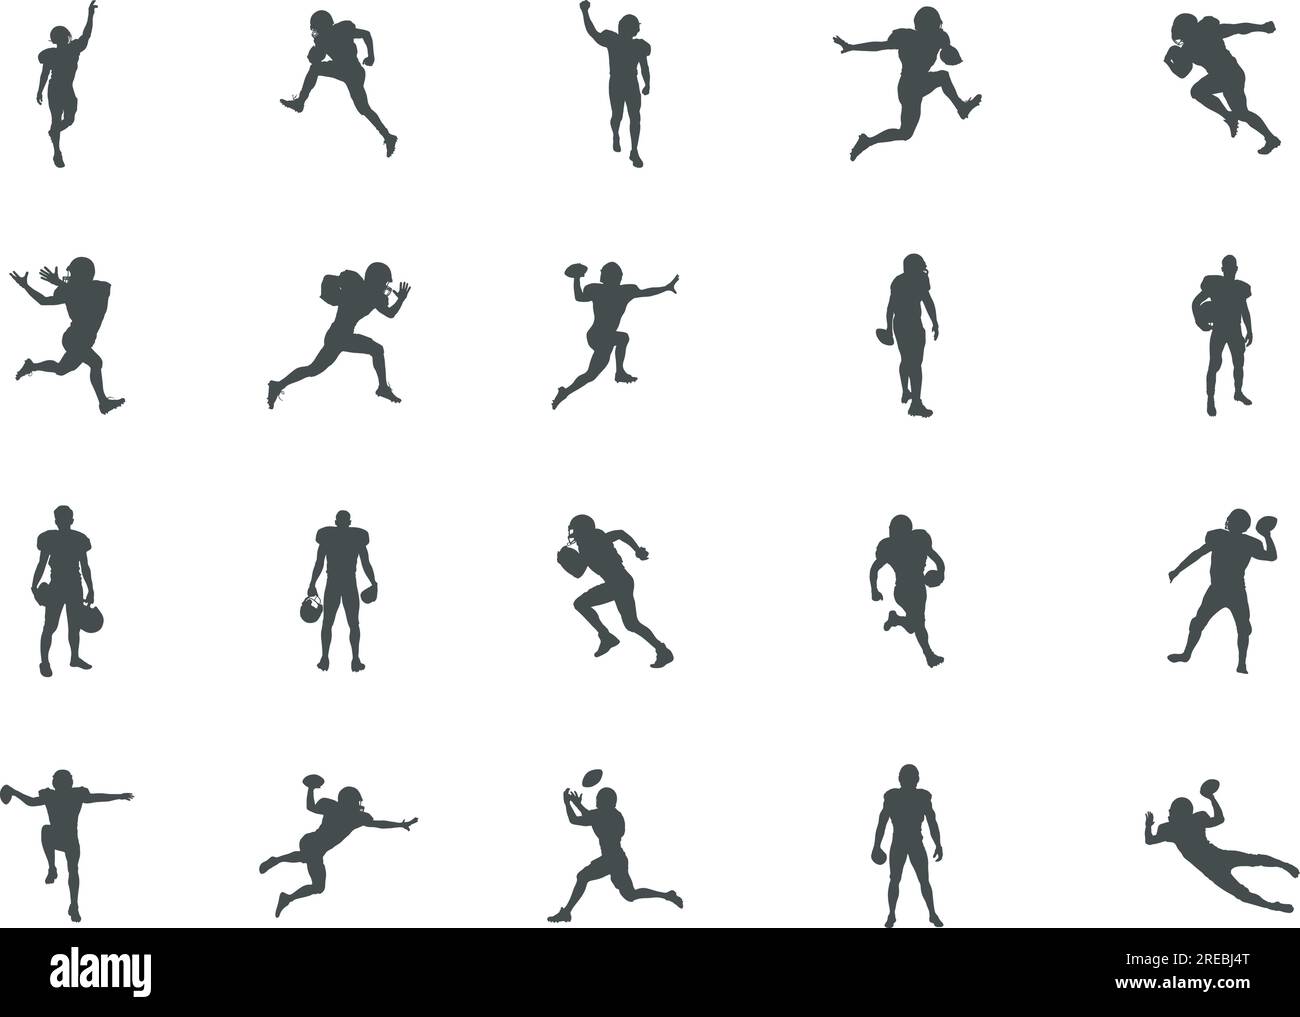 American Football Player Silhouettes, Football Silhouettes, Player silhouettes, American Football Silhouette, Football Player Silhouettes Stock Vector